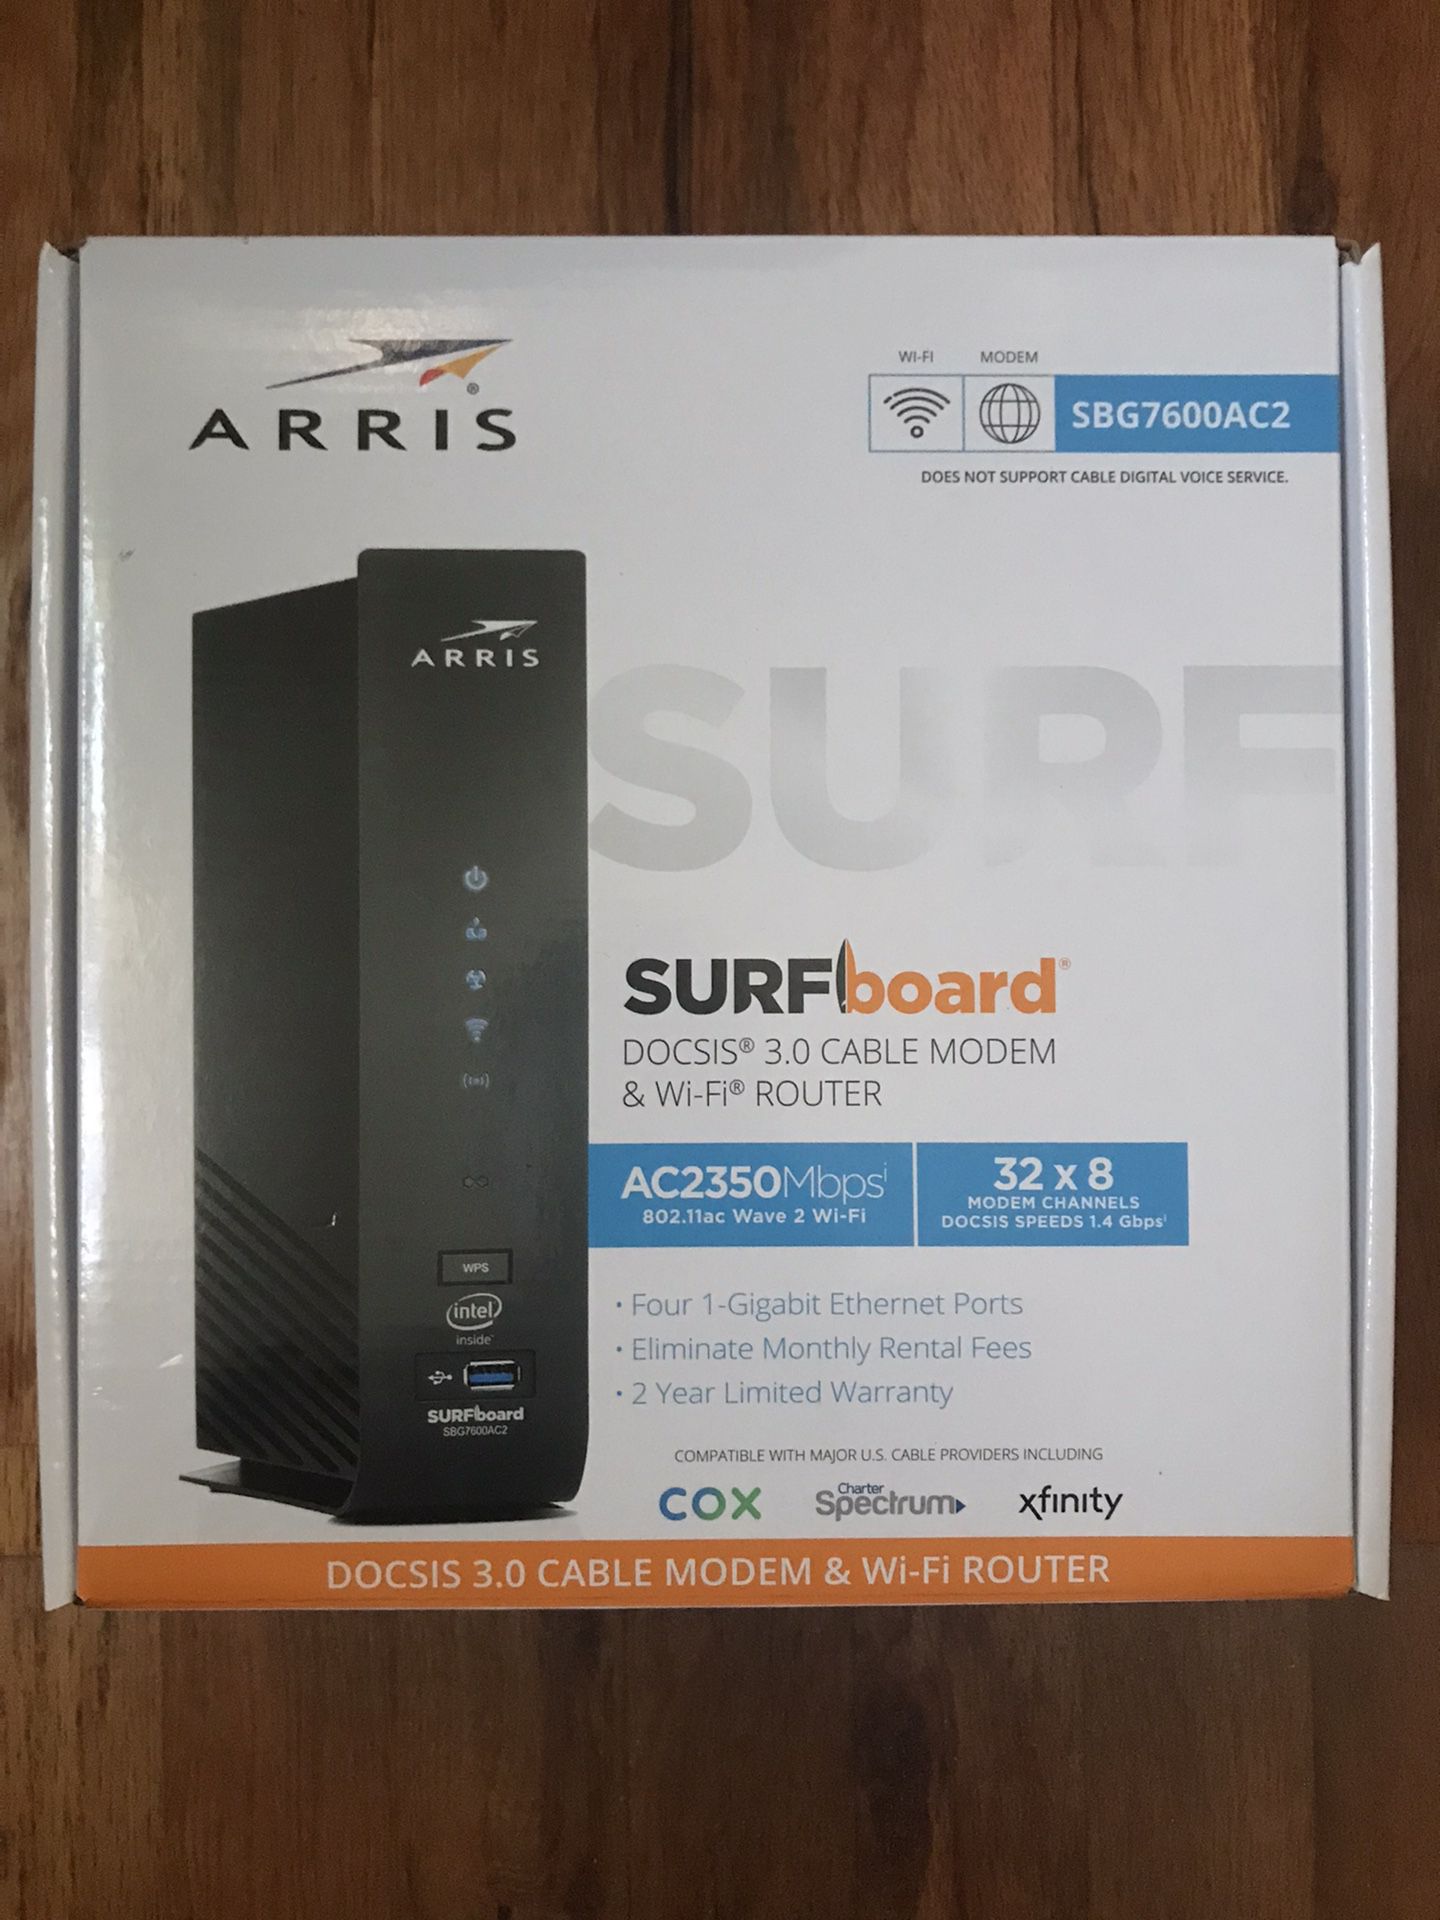 WiFi Router & Cable Modem (Arris) - Never Used